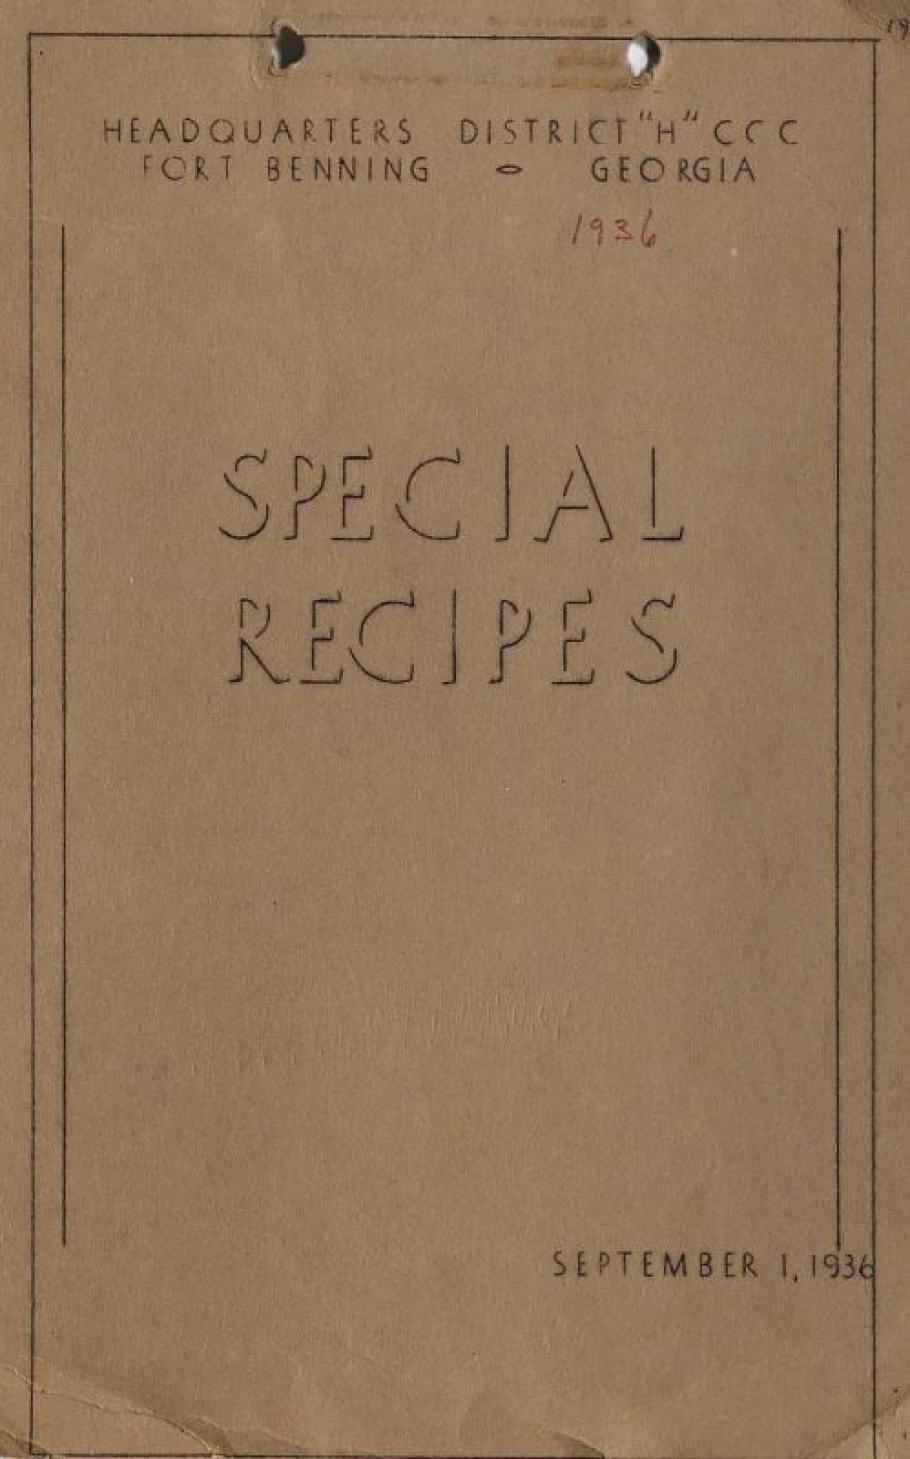 Cover Page, brown paper with two punched holes centered along the upper part of the page. Text in first two rows: "Headquarters District 'H' CCC / Fort Benning GA." Centered text in outline font "Special Recipes." Smaller text in lower right corner, "September 1, 1936" 